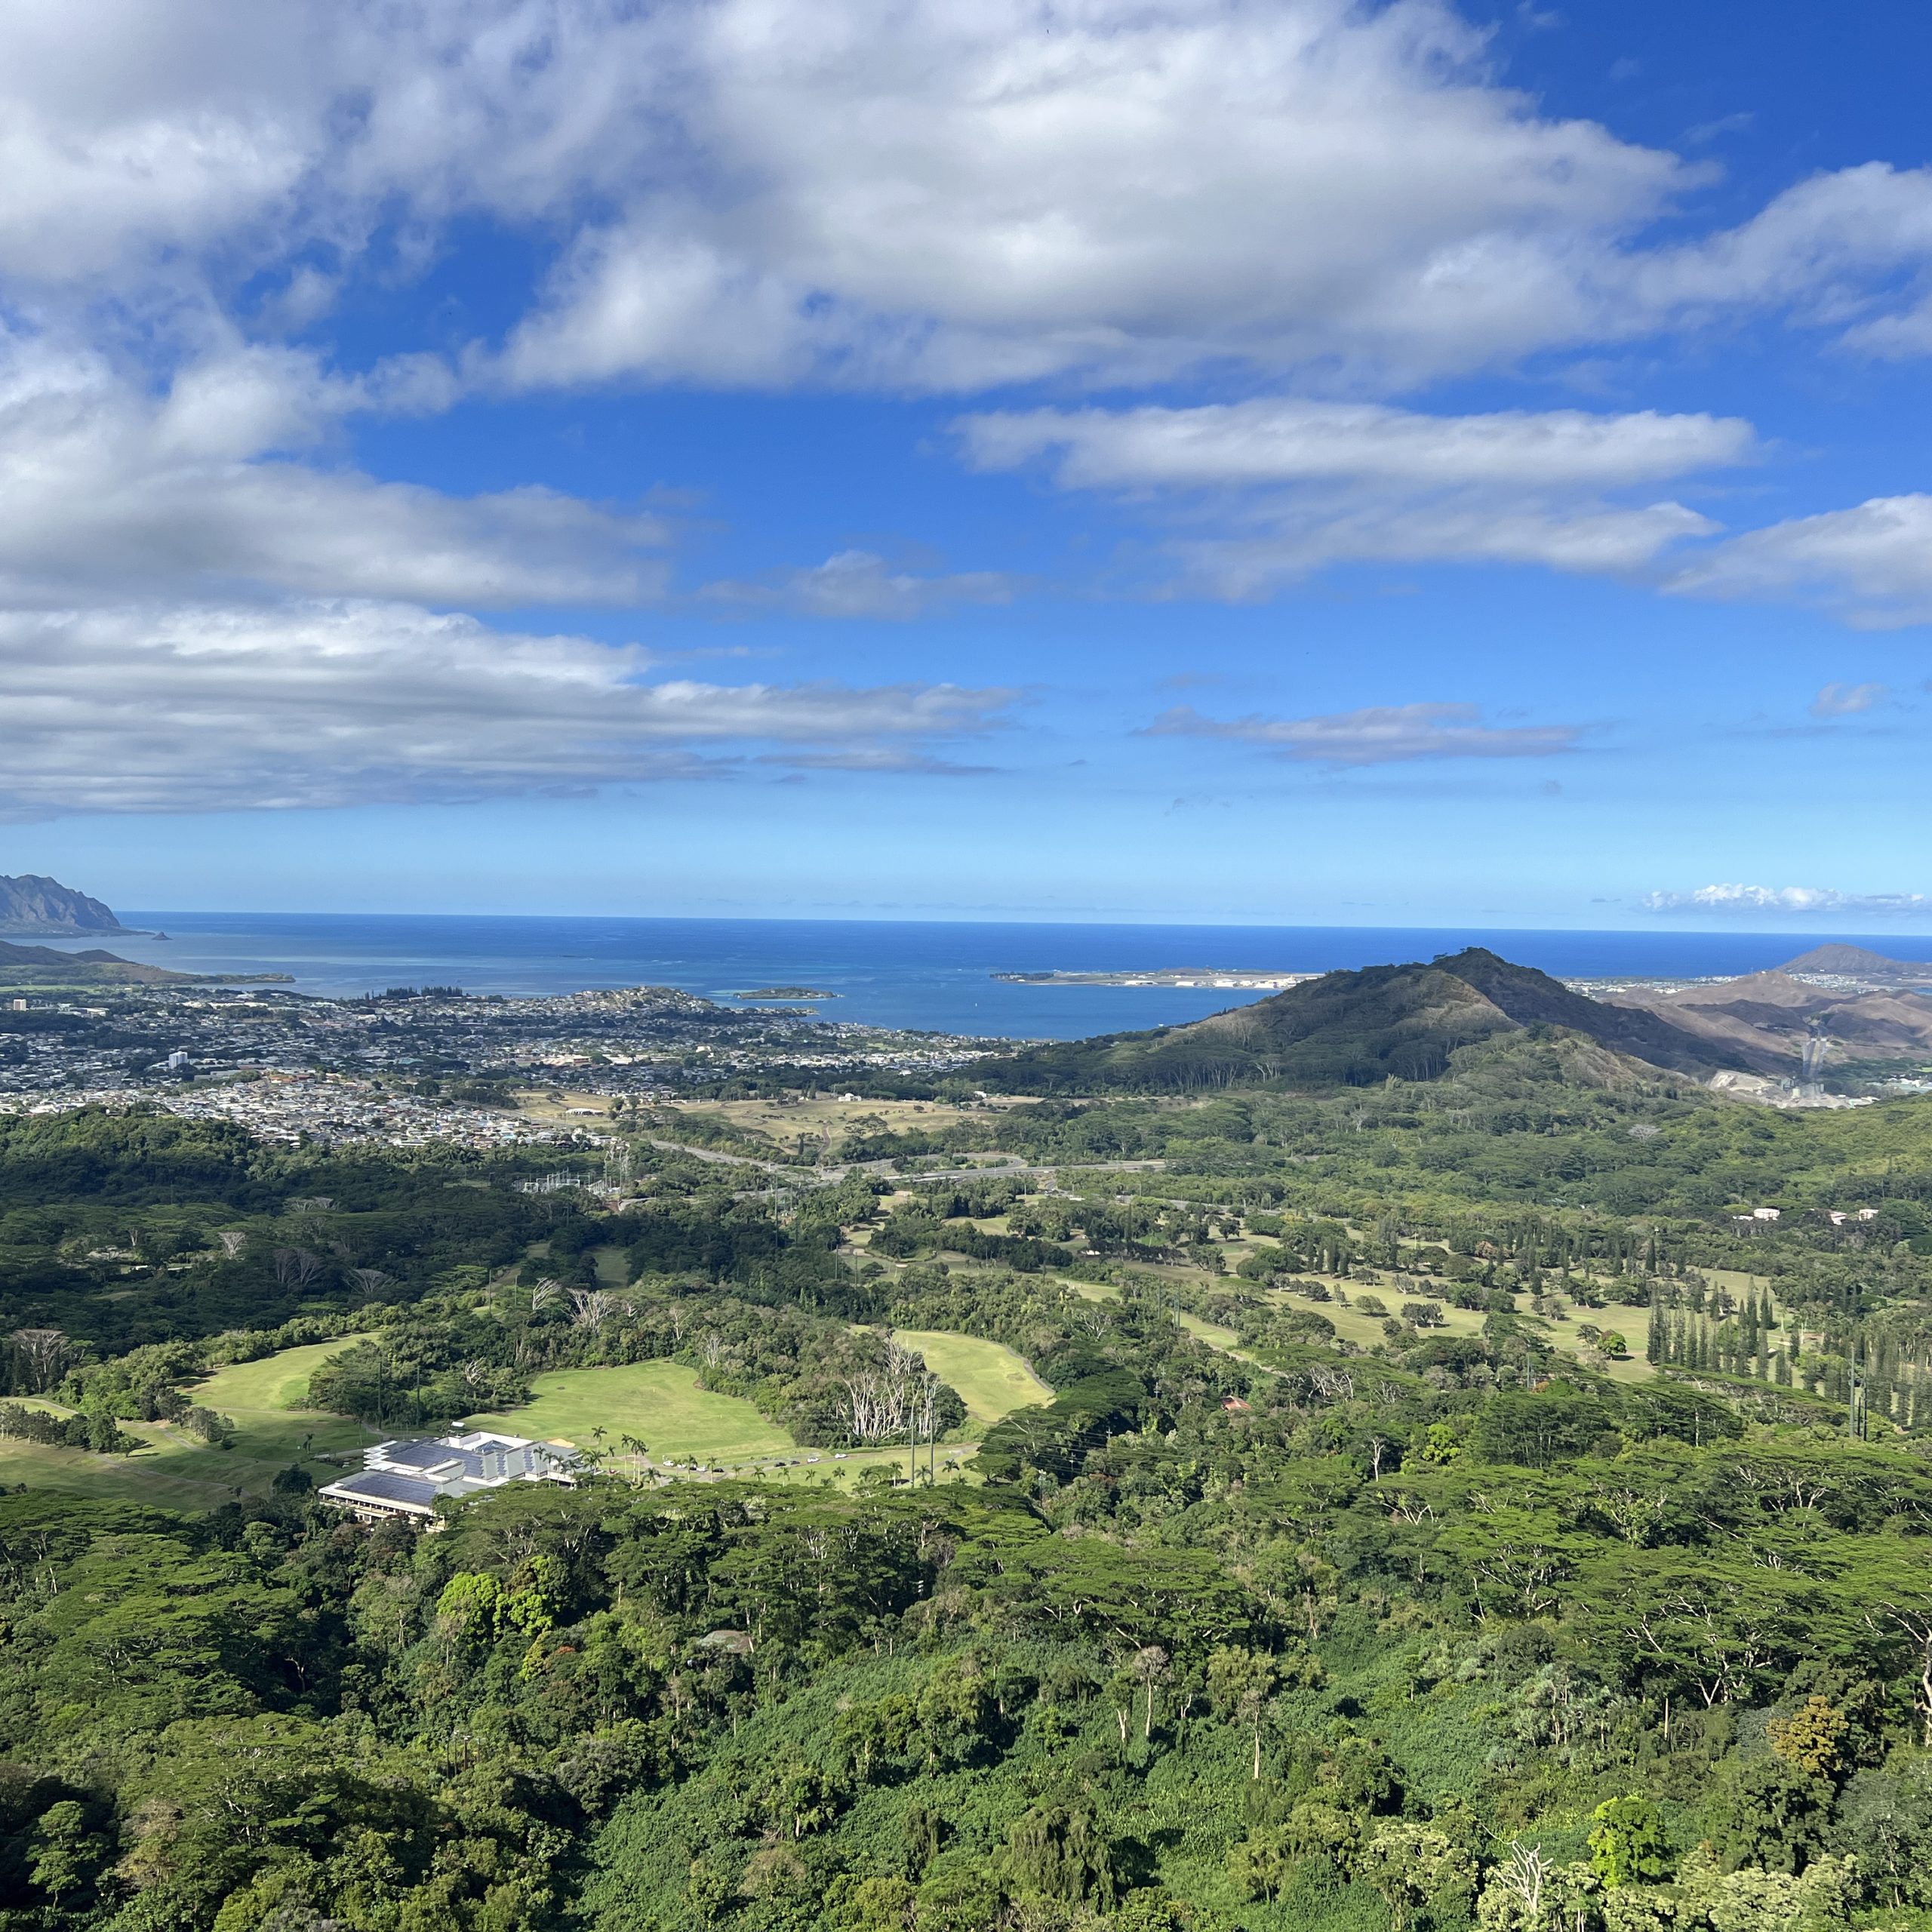 Pali Lookout: A Window to Oahu's Dramatic History and Scenery